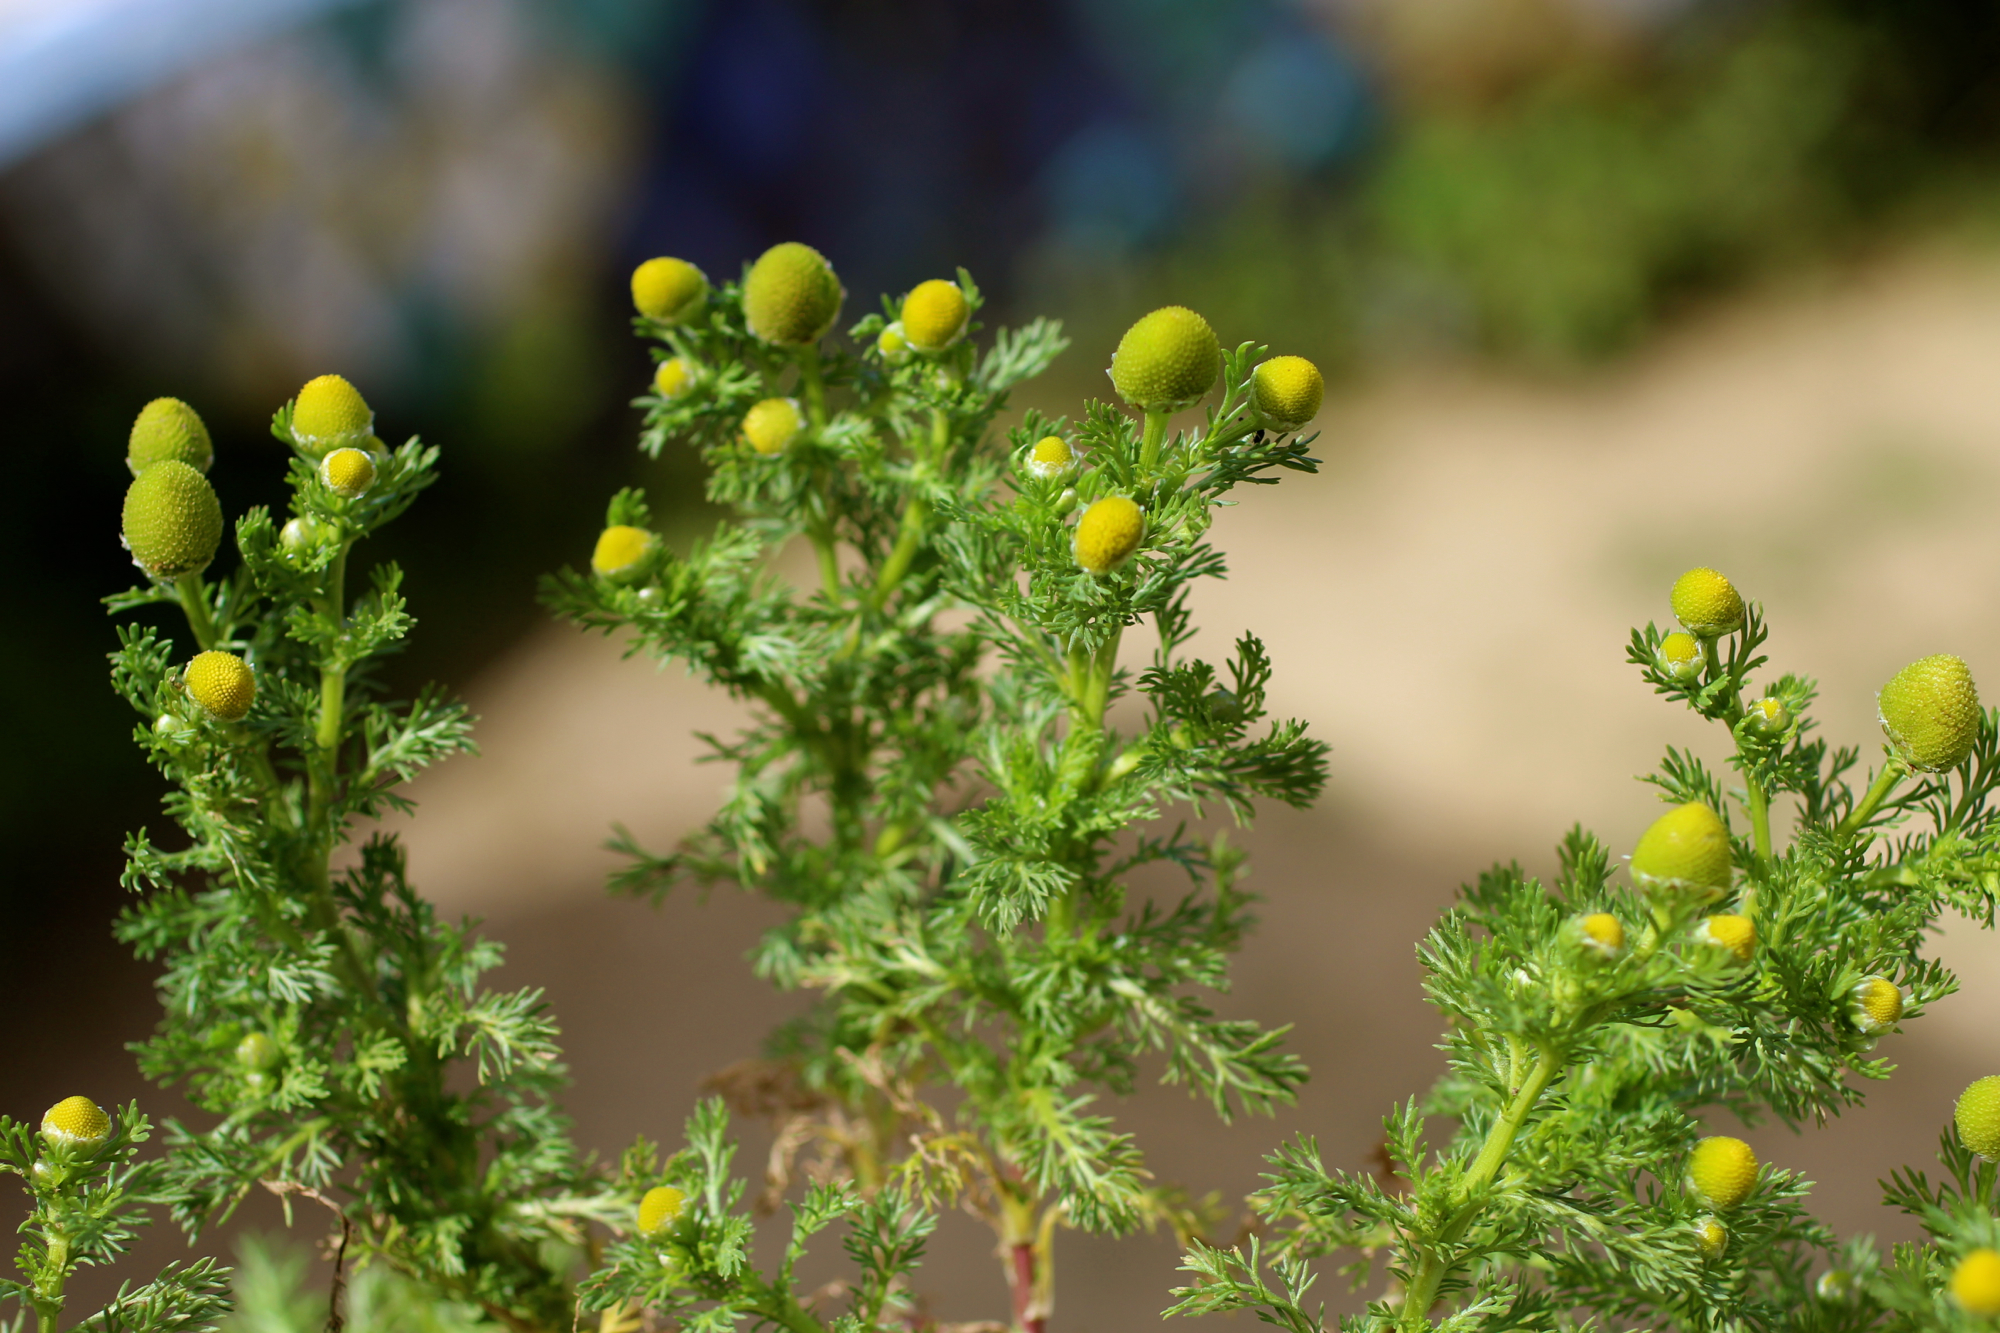 Wild chamomile, or pineapple weed grows almost everywhere and is very distinctive.